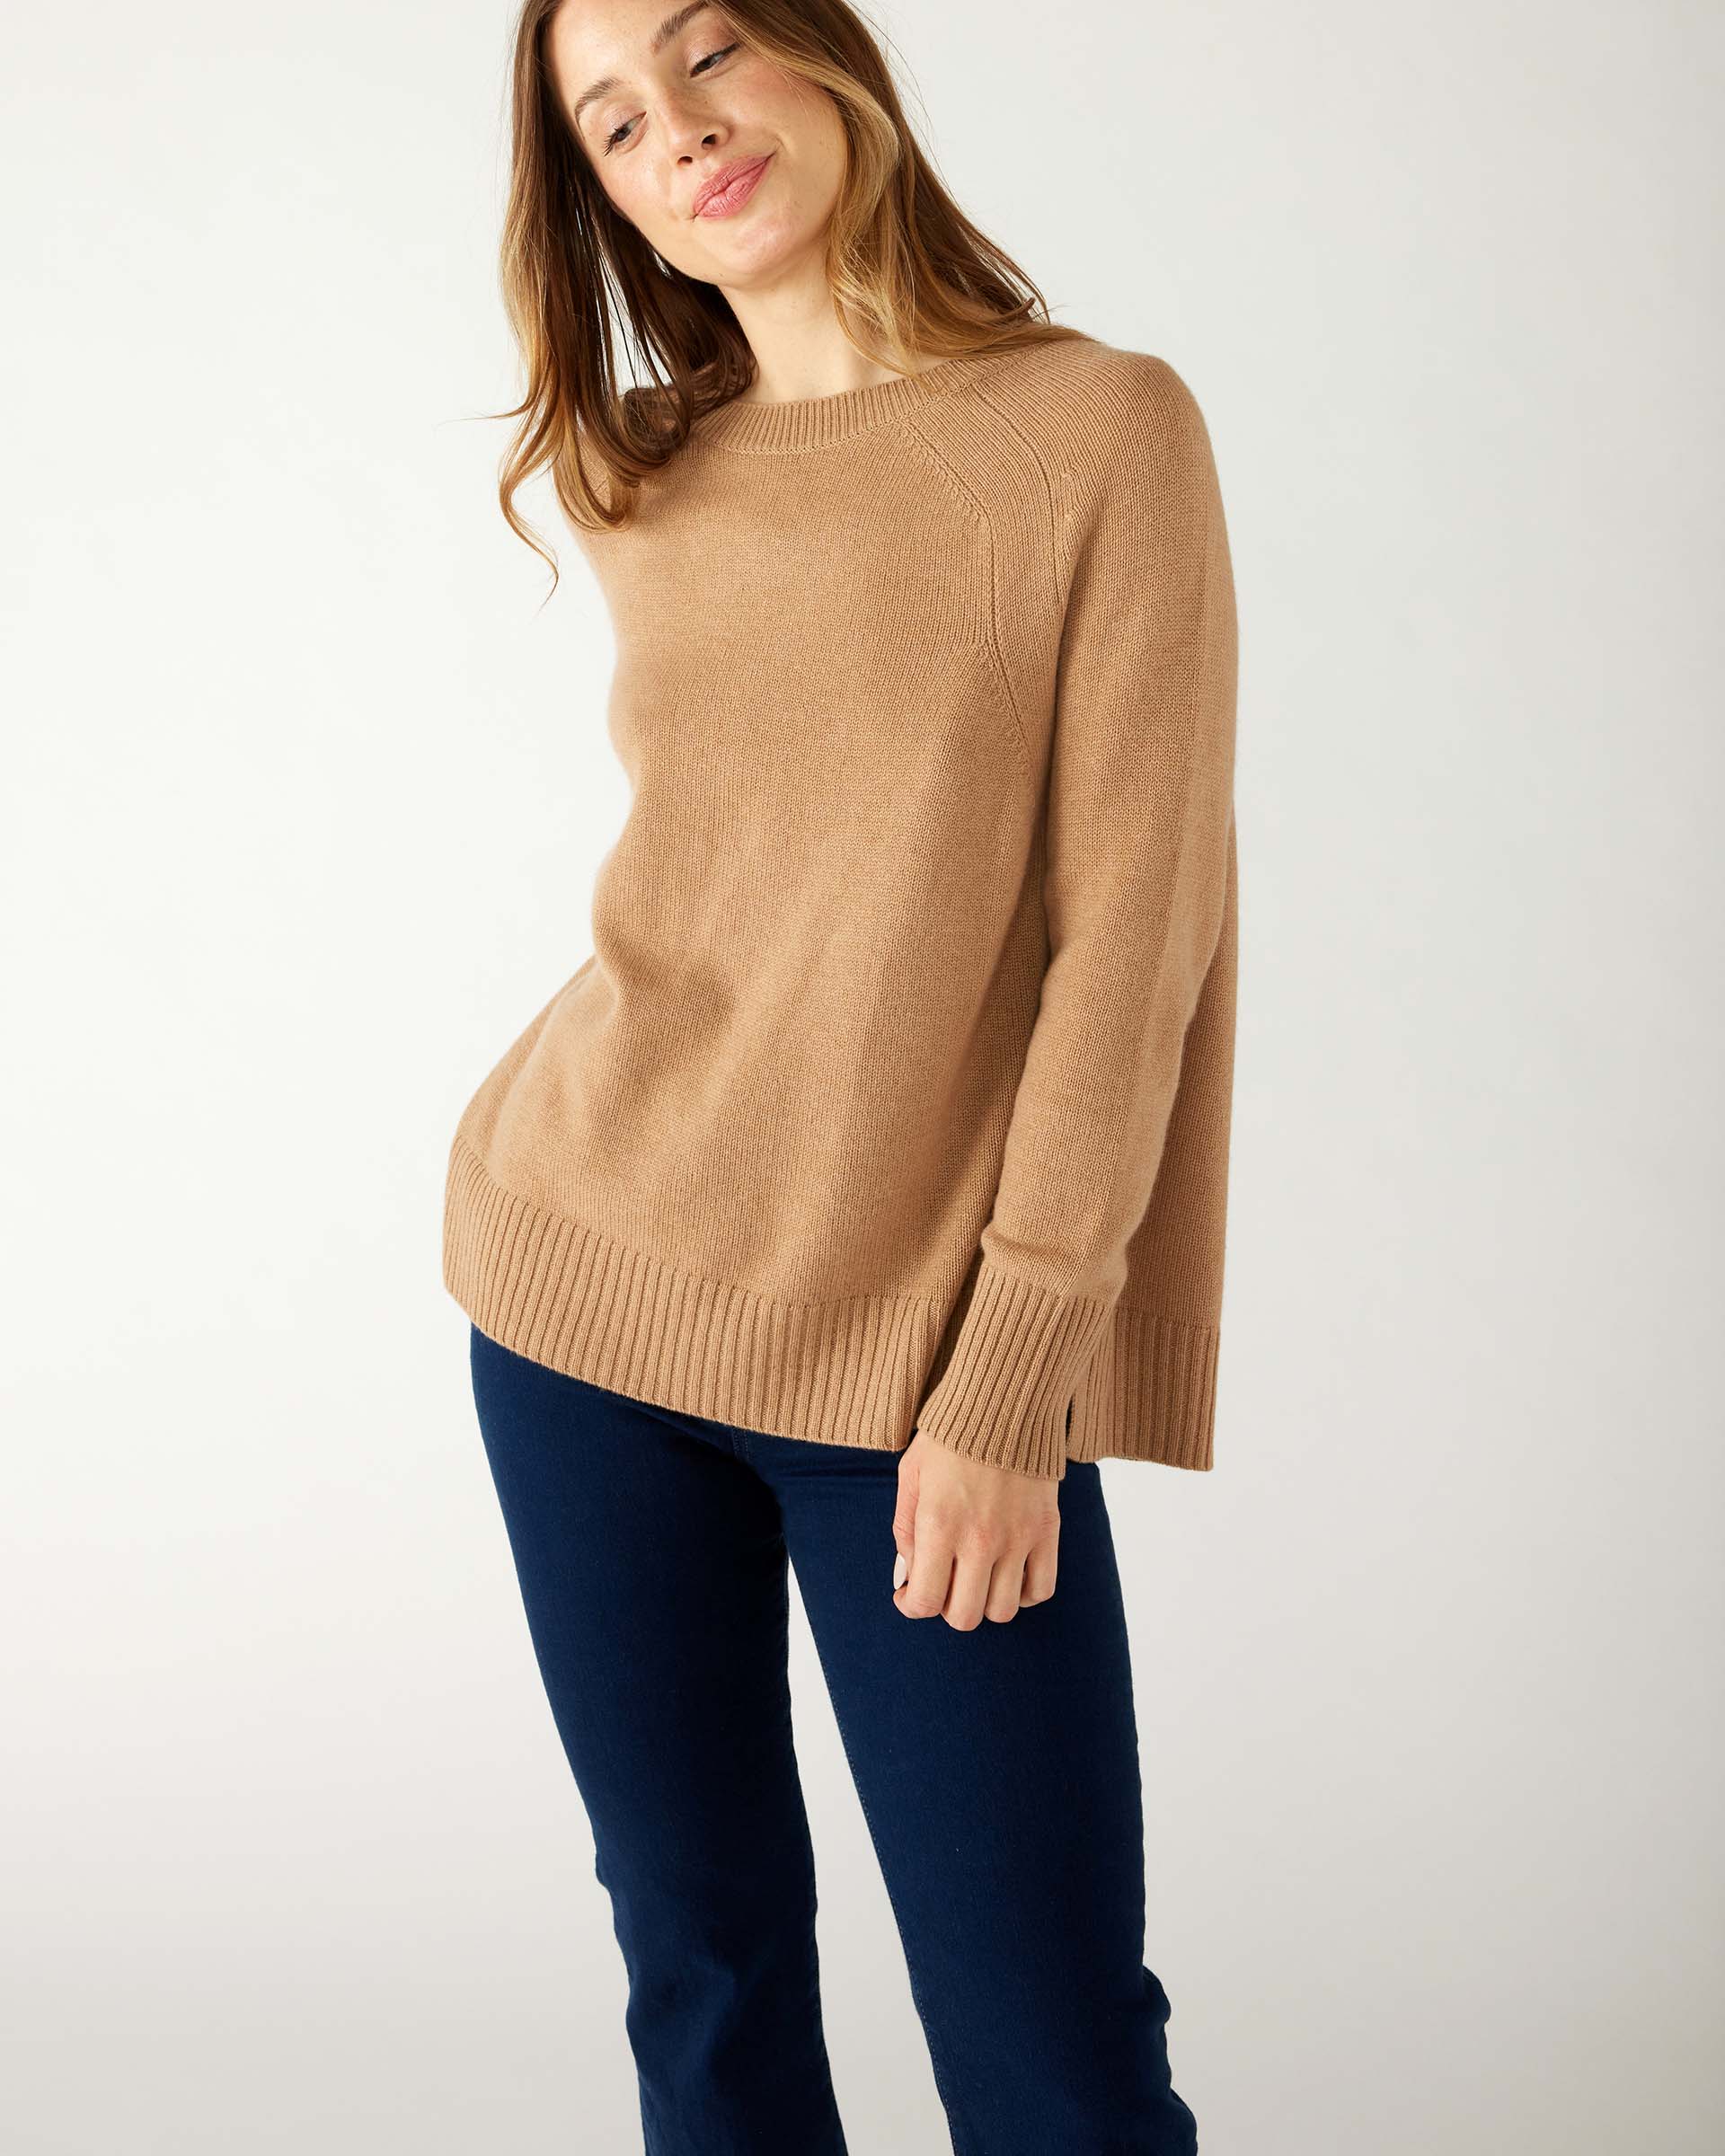 woman wearing mersea banff cashmere sweater in camel with hand on hip